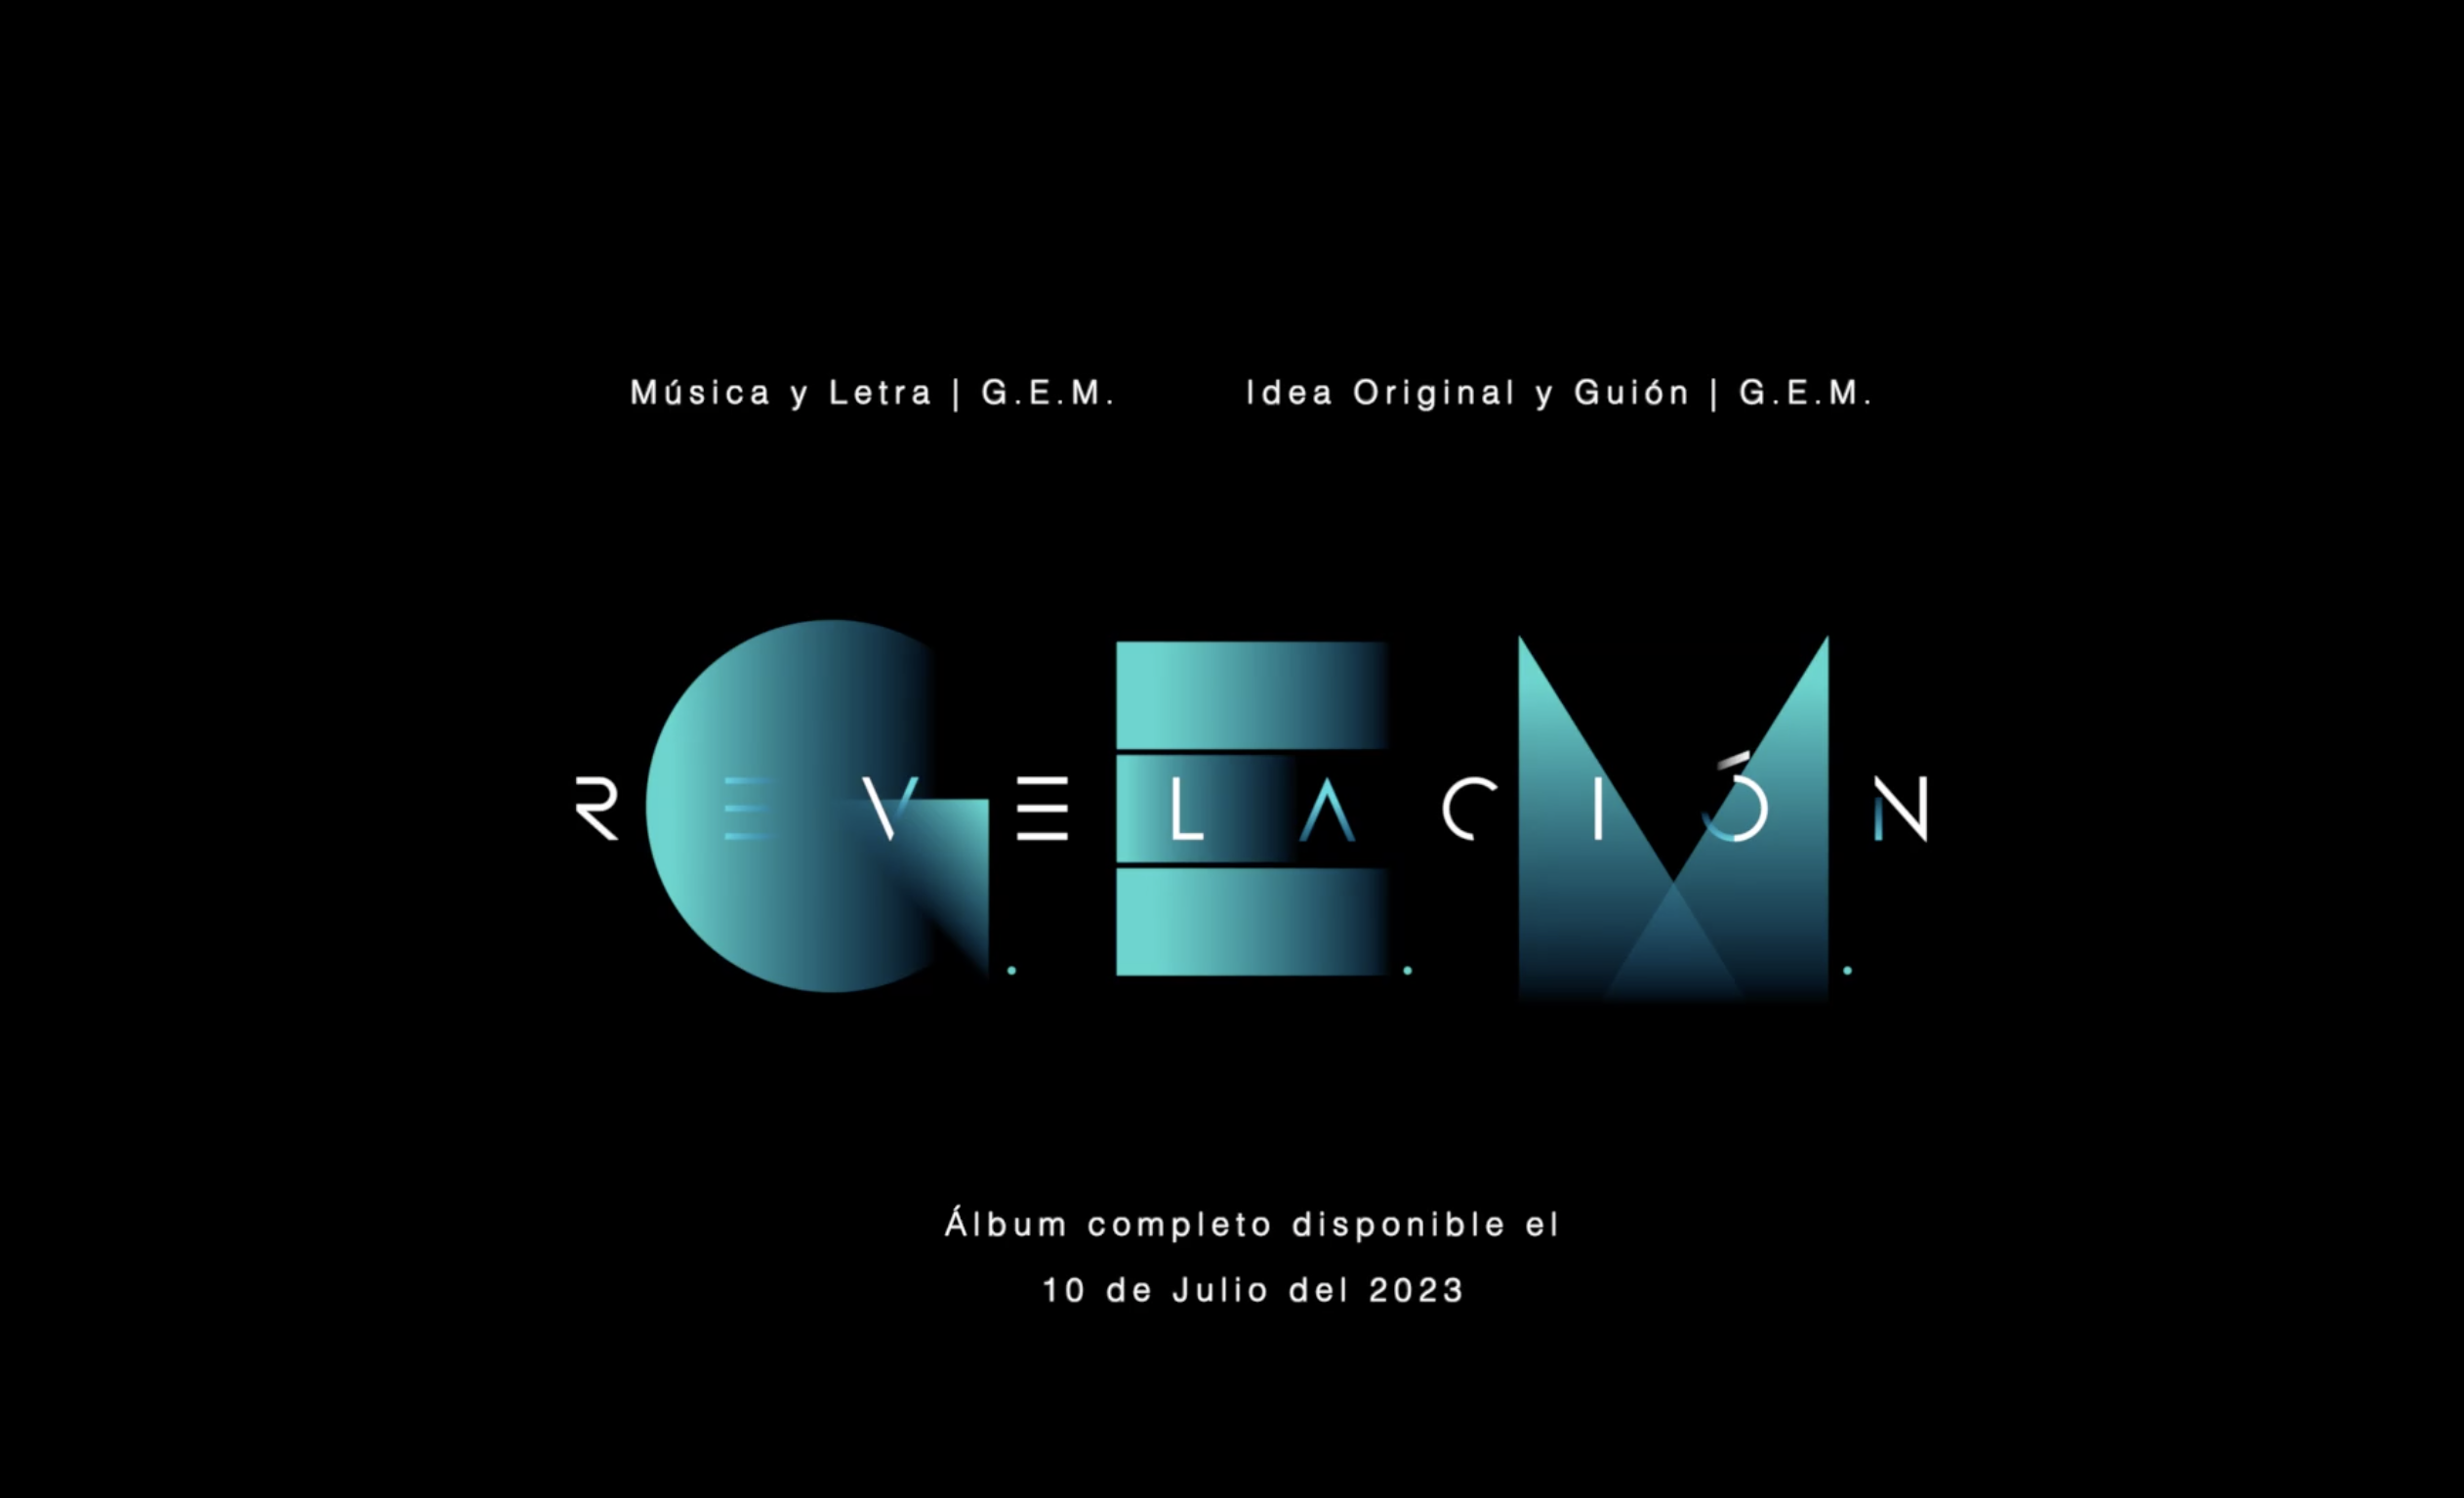 A poster of the announcement in Spanish for G.E.M.'s new album 